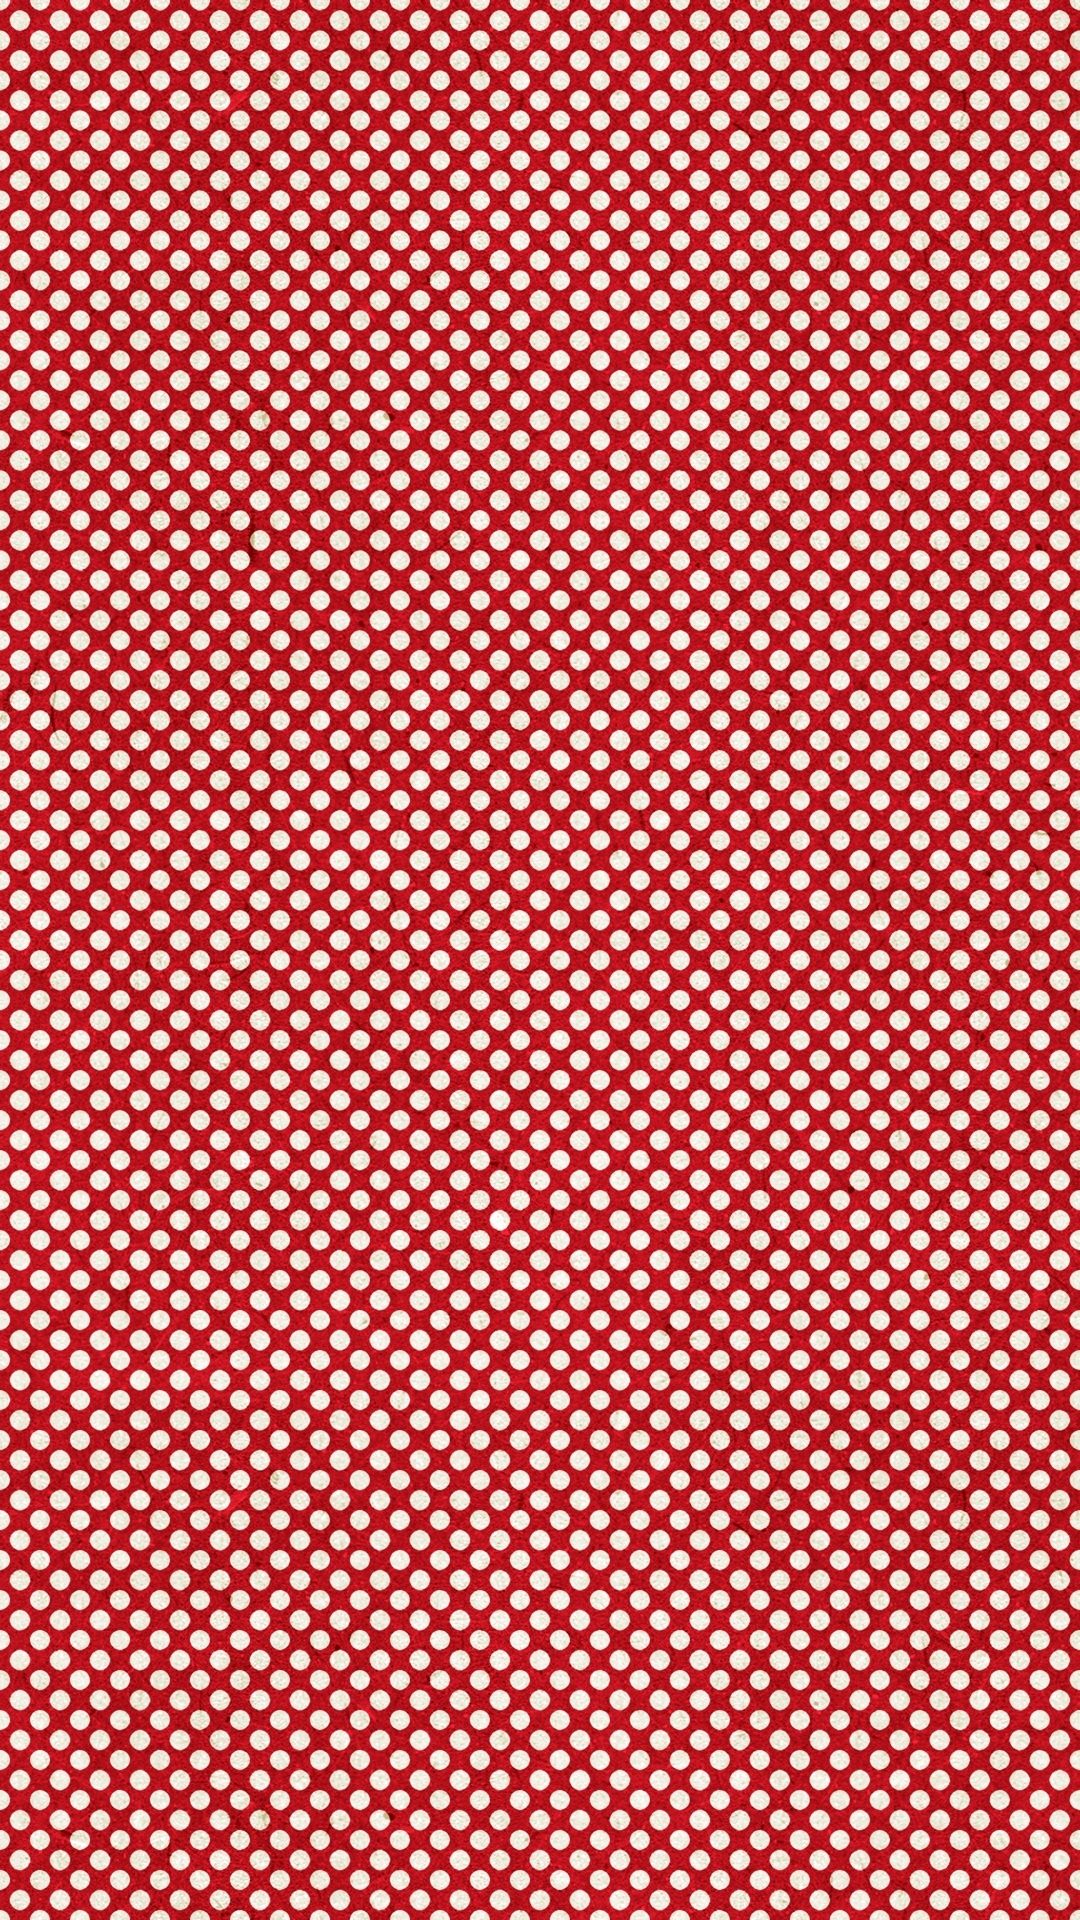 iPhone 6 Plus Wallpaper Red Pattern 06 | iPhone 6 Wallpapers